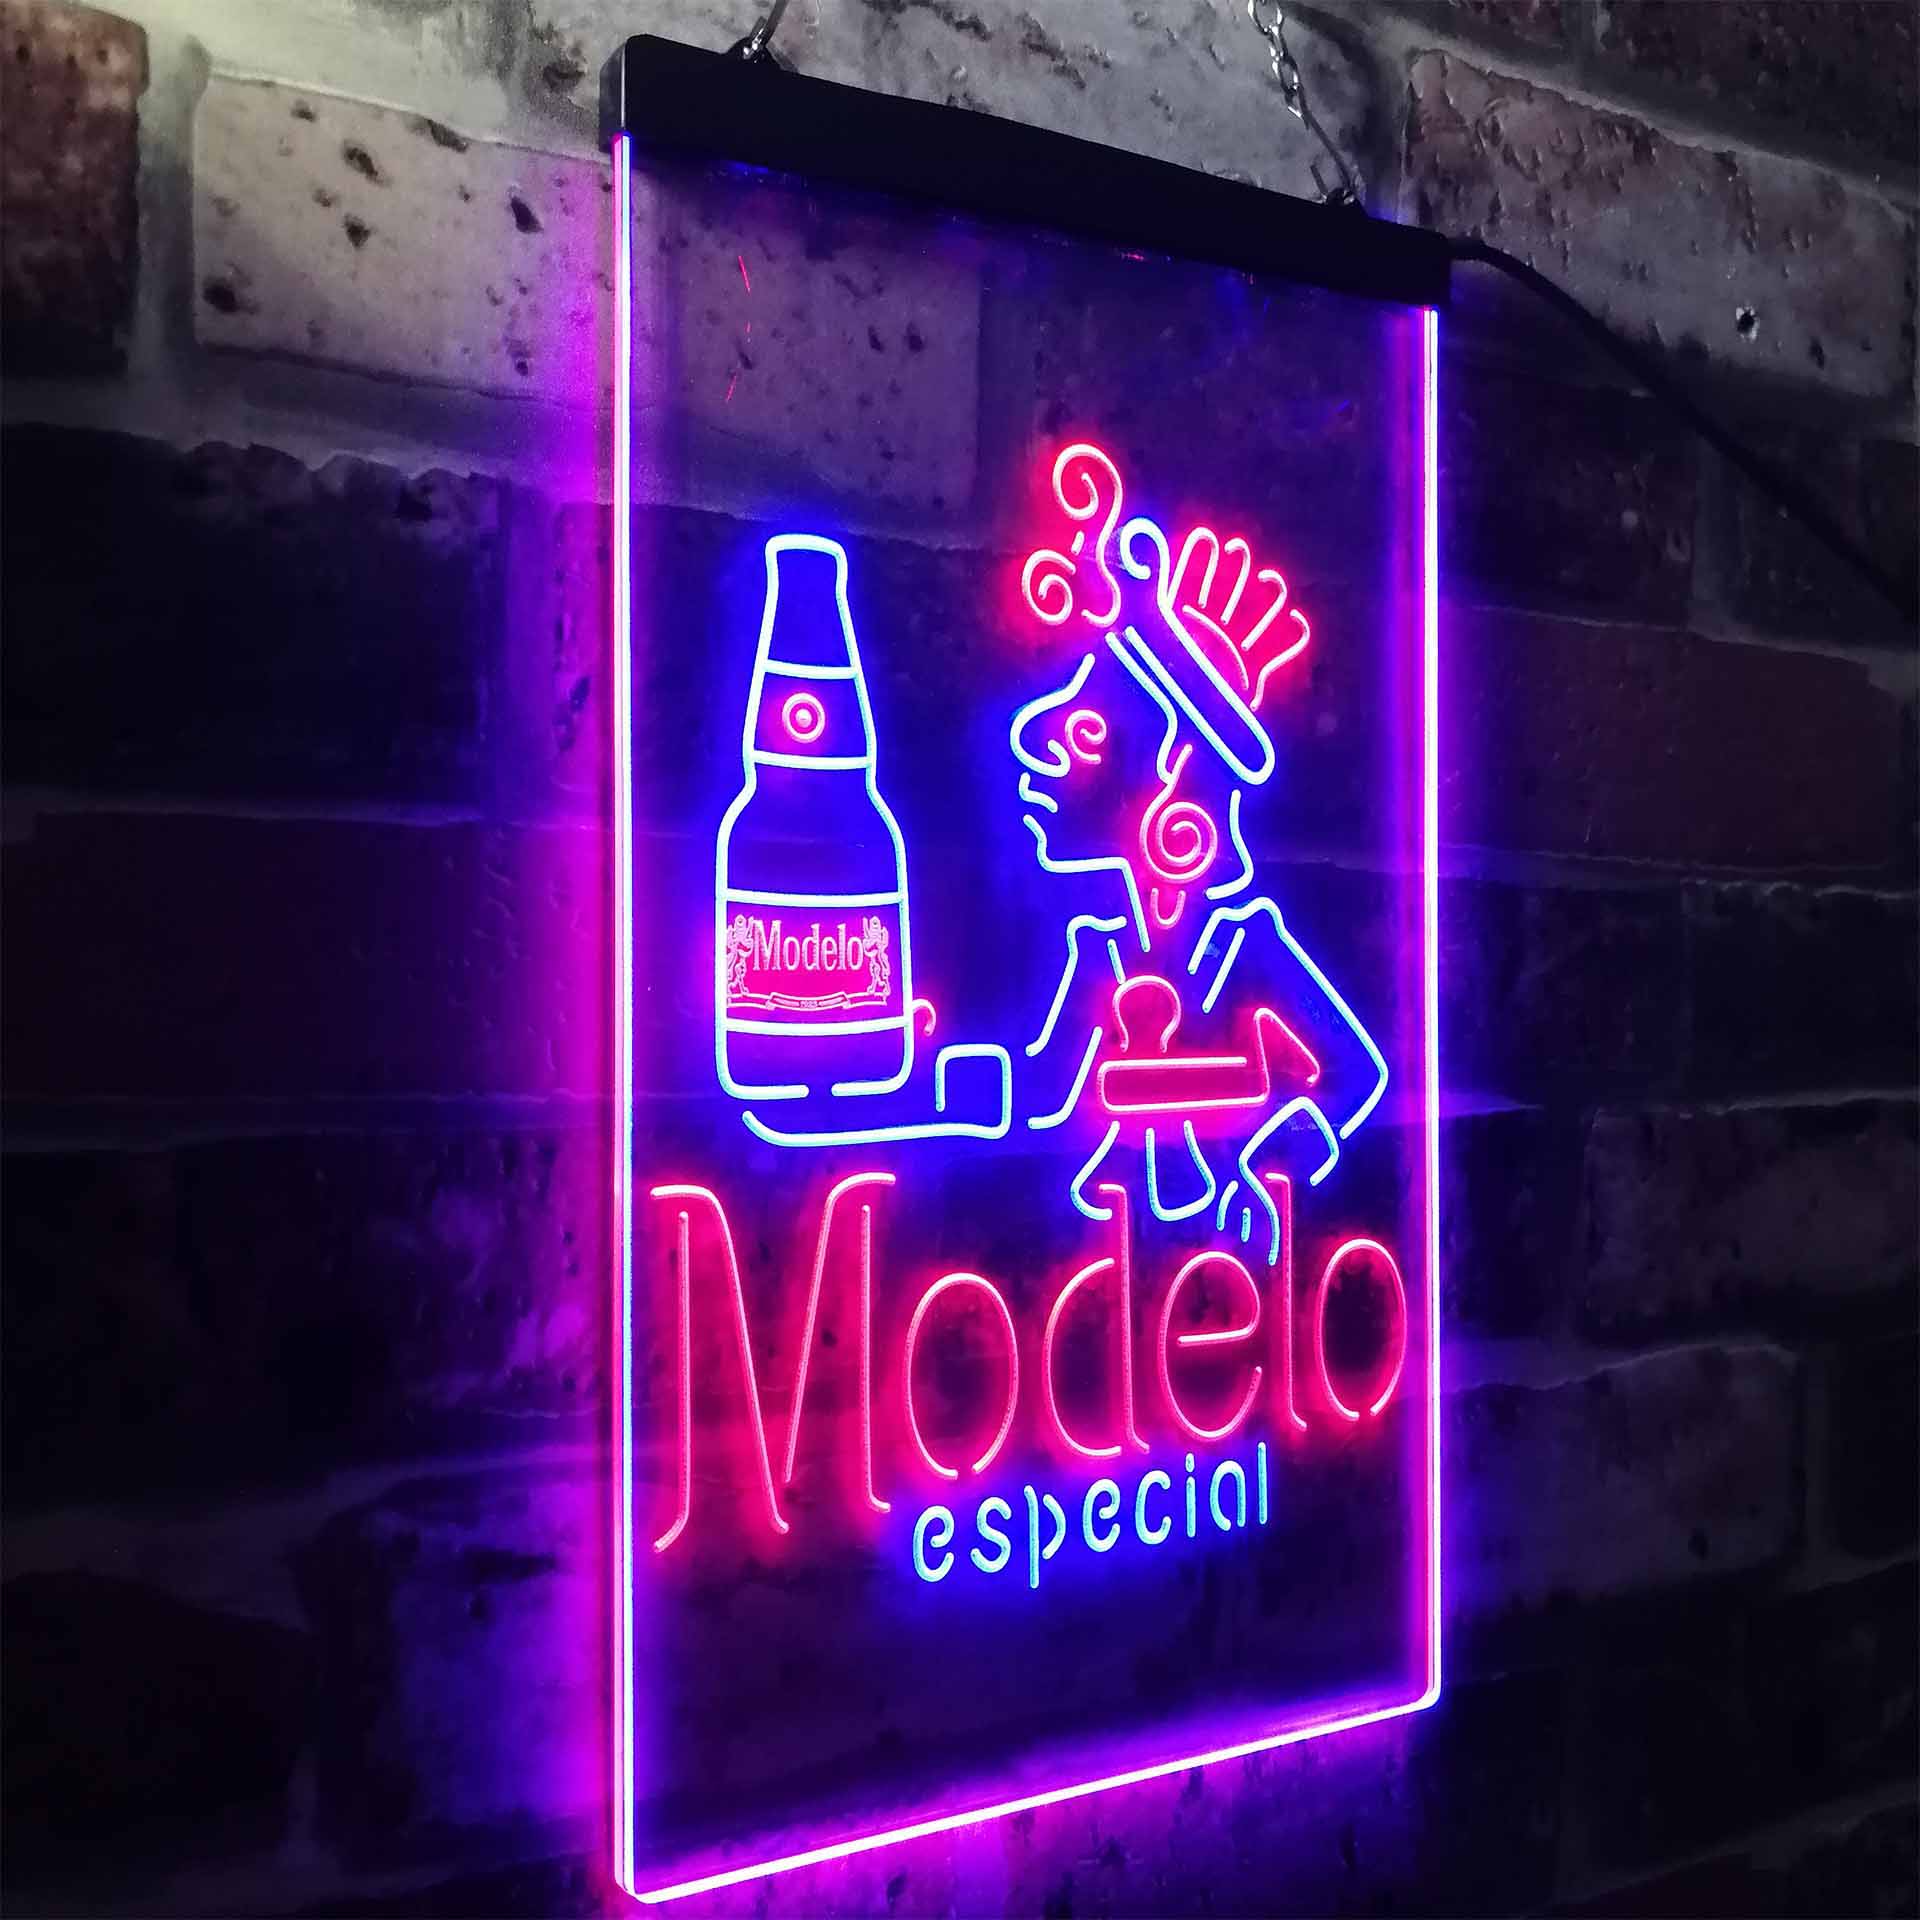 Modelo Especial Adjunct Lager Man Cave Neon LED Sign